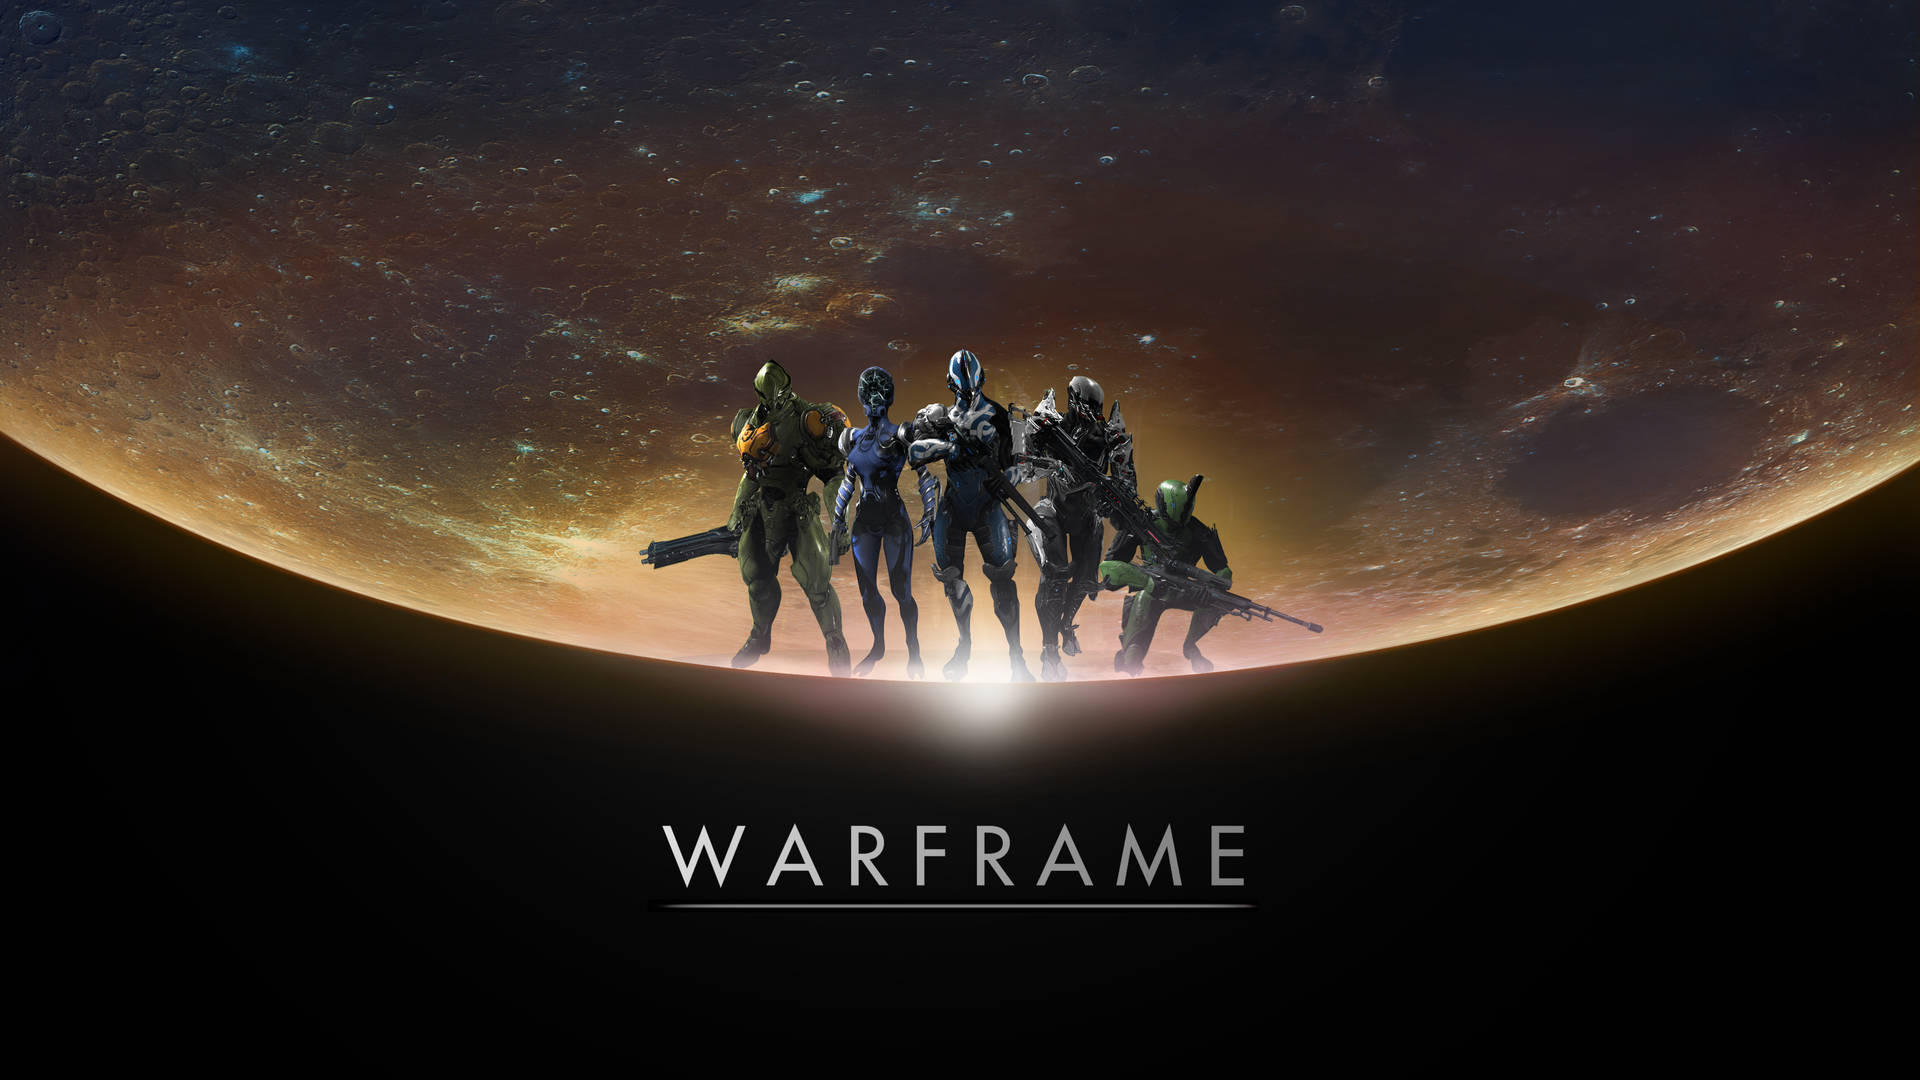 Warframe Tenno ancient soldiers with weapons in the Solar System background wallpaper.  